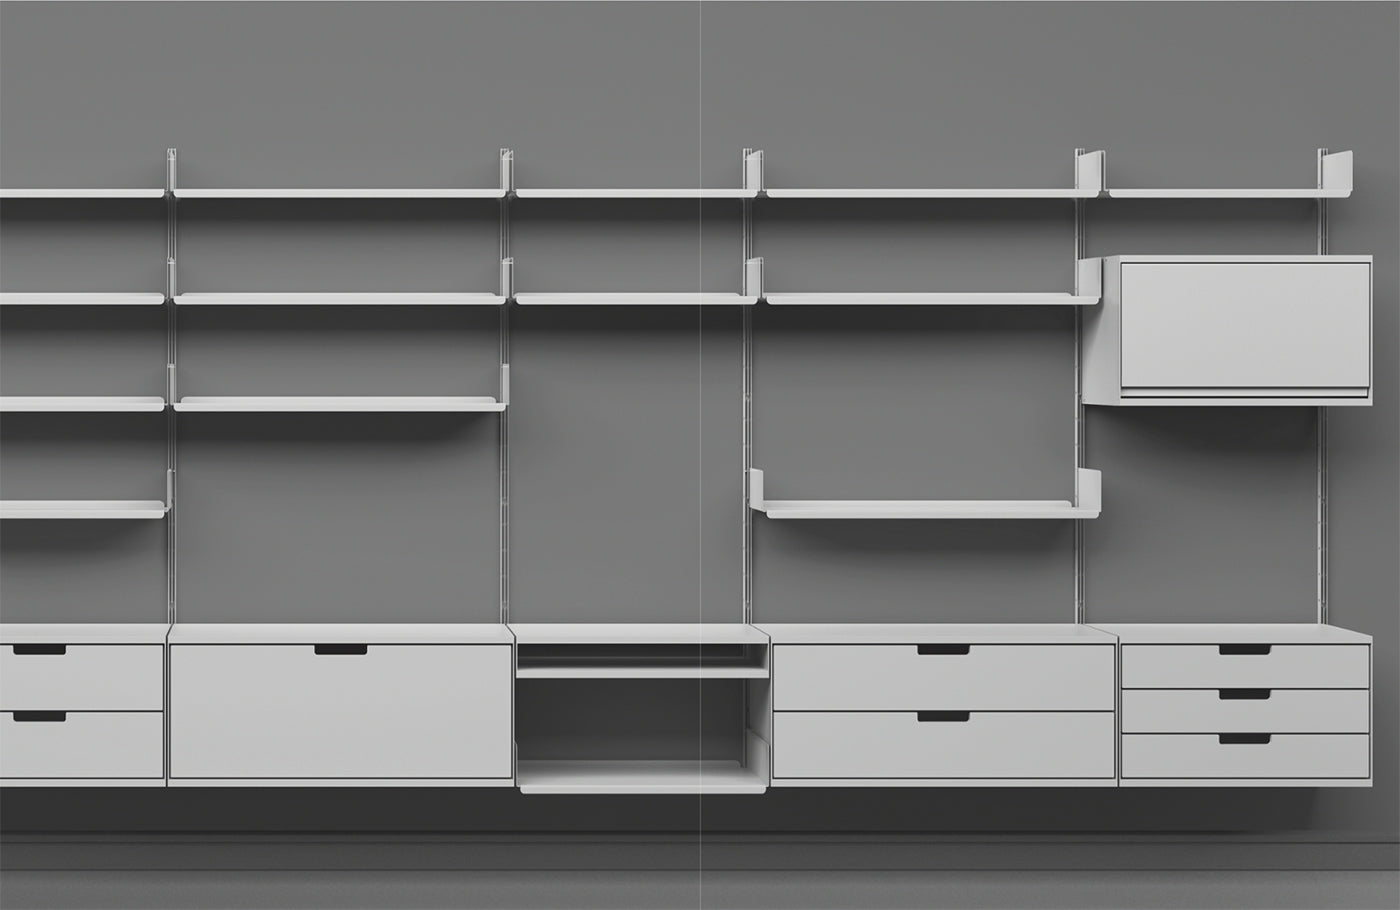 Shelving system photographed in black and white designed by Dieter Rams for furniture brand Vitsoe. (Design by Dieter Rams, photography by Vitsoe)